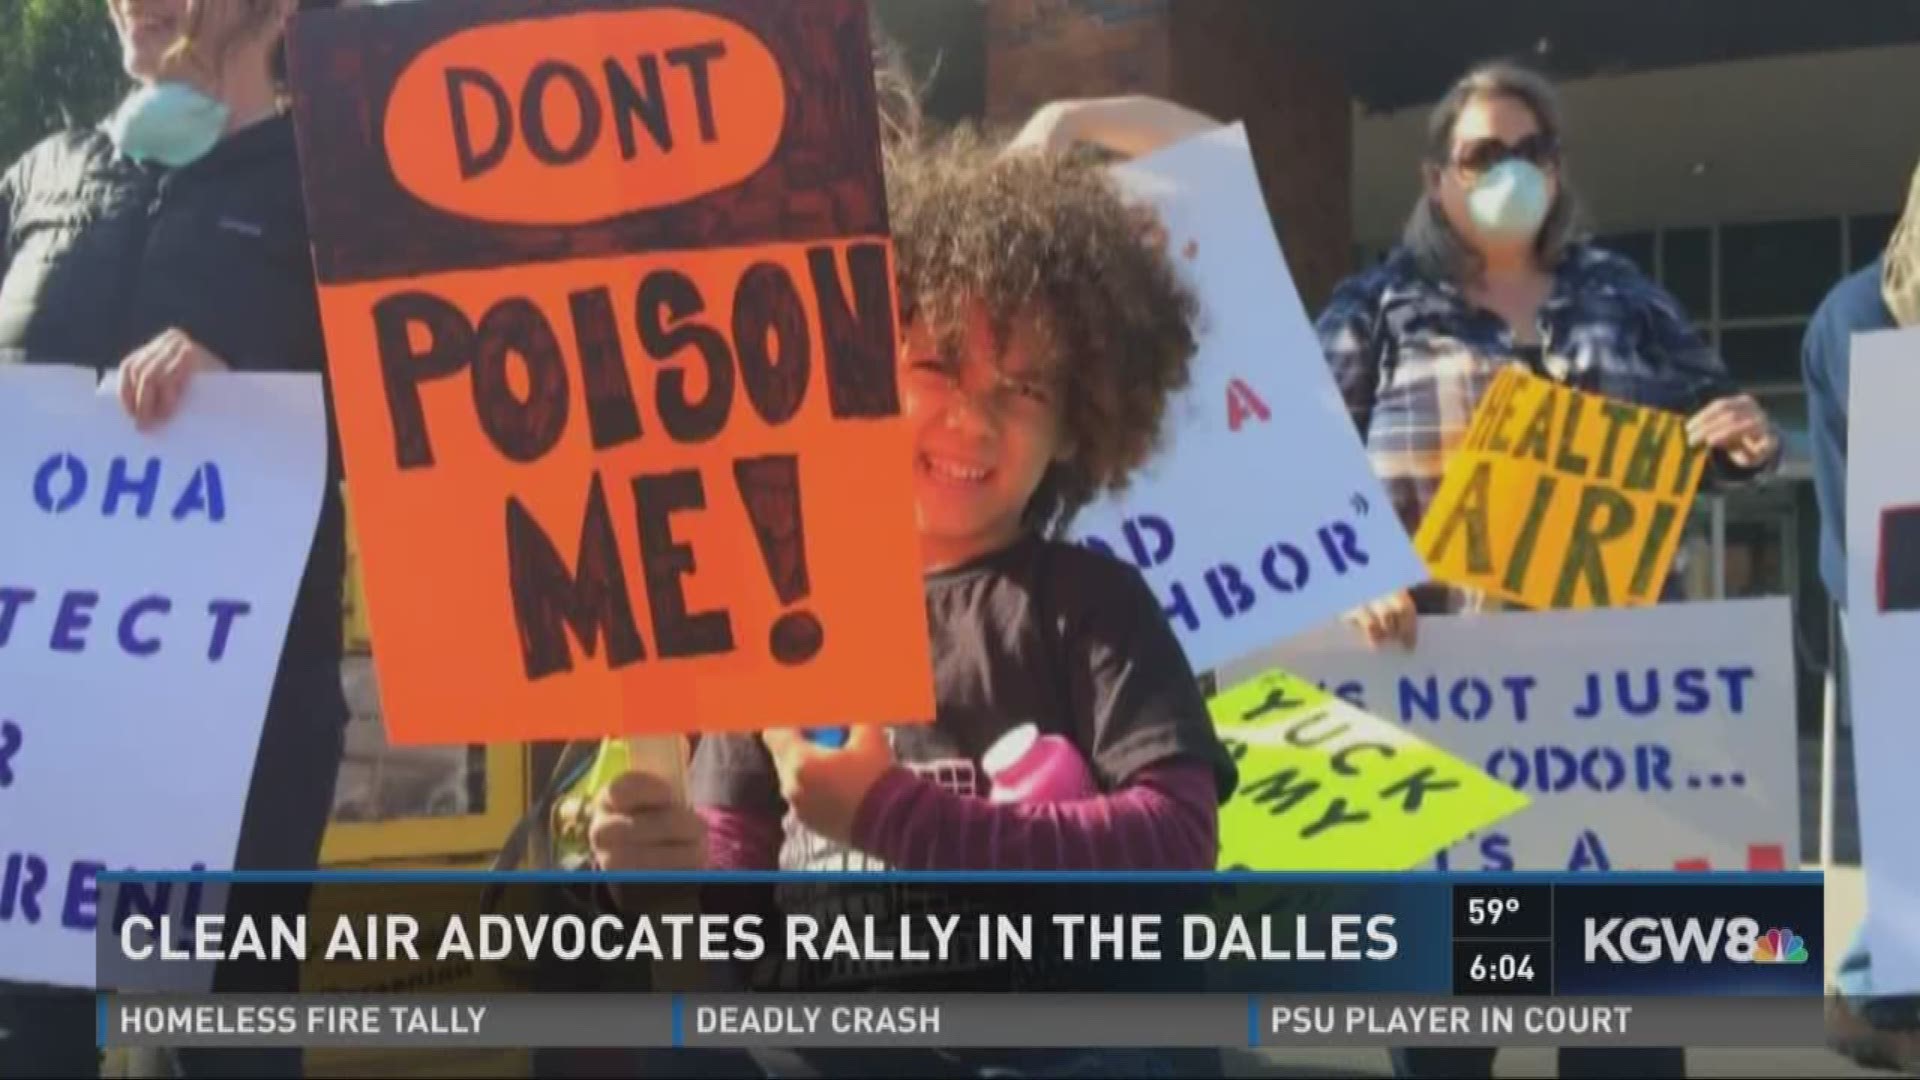 Protests over toxic air in The Dalles